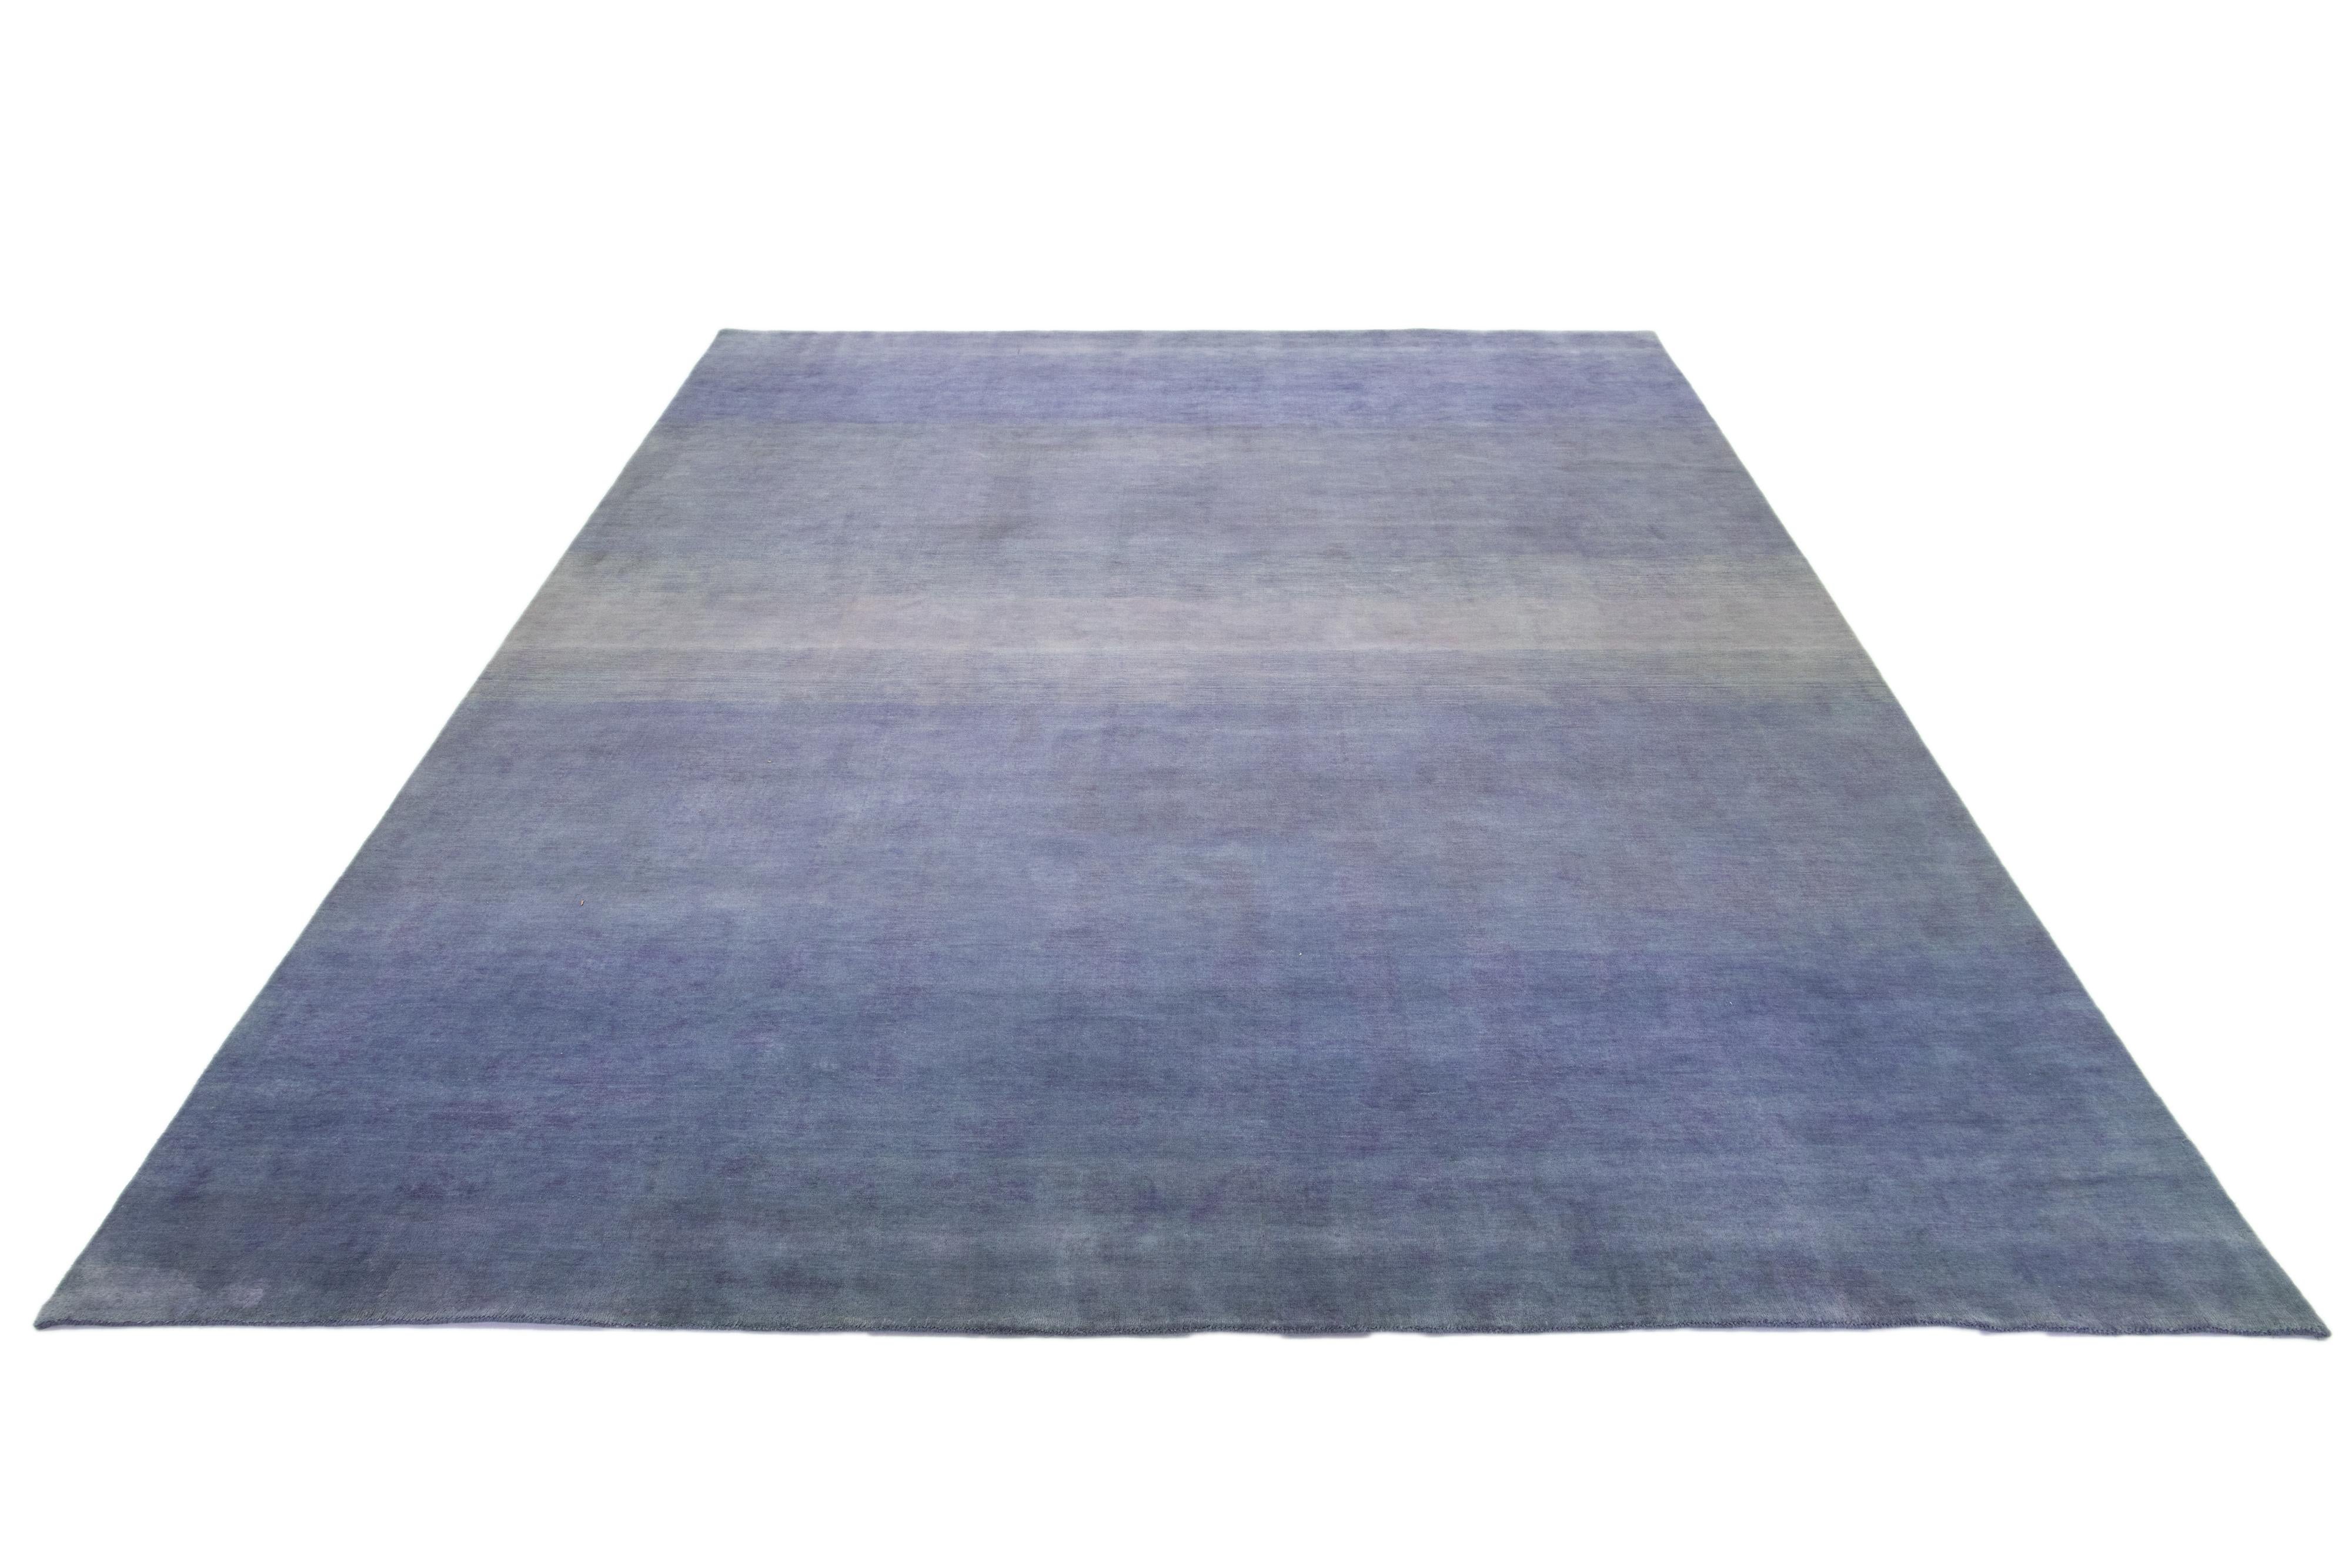 This modern Gabbeh rug is hand-loomed with a contemporary minimalist pattern. The blue base is accented with beige gradient color details.

This rug measures 12' x 14'9